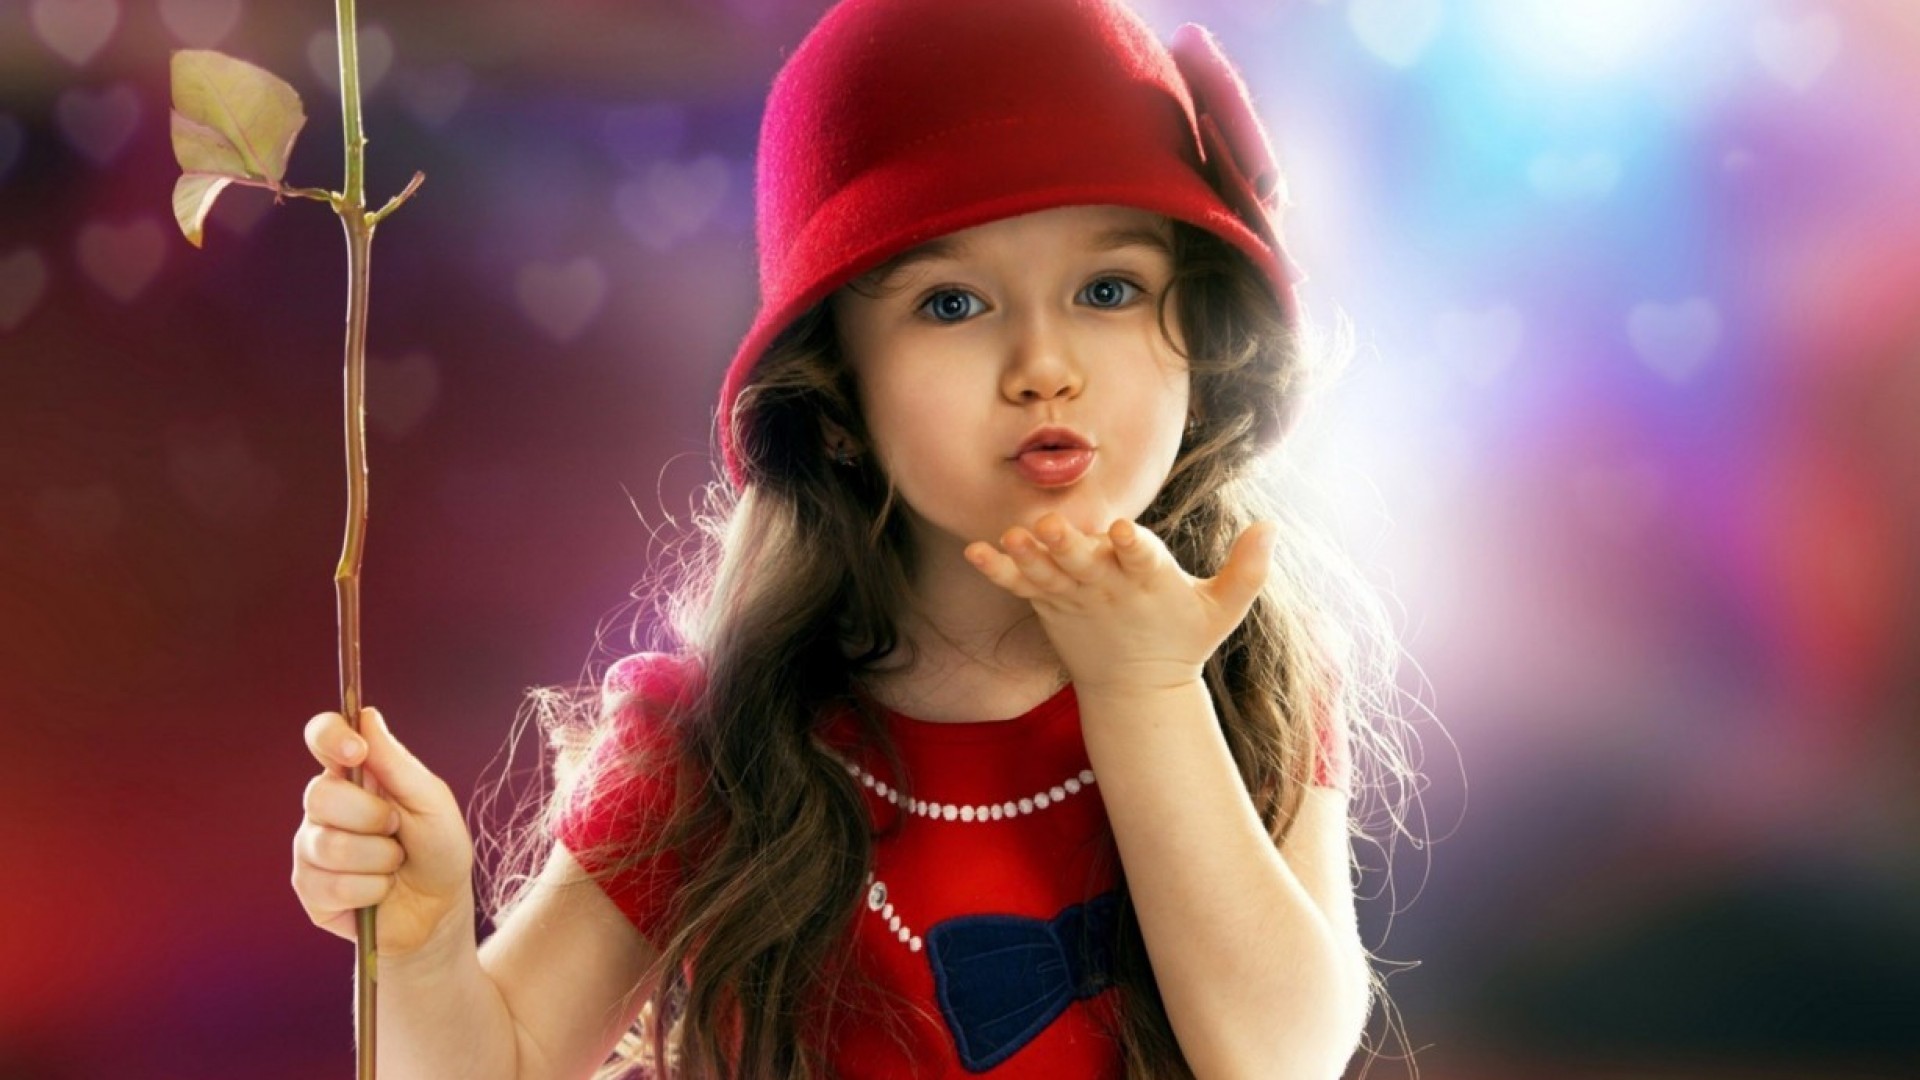 Undefined Baby Girl Images Wallpapers - Little Child - HD Wallpaper 